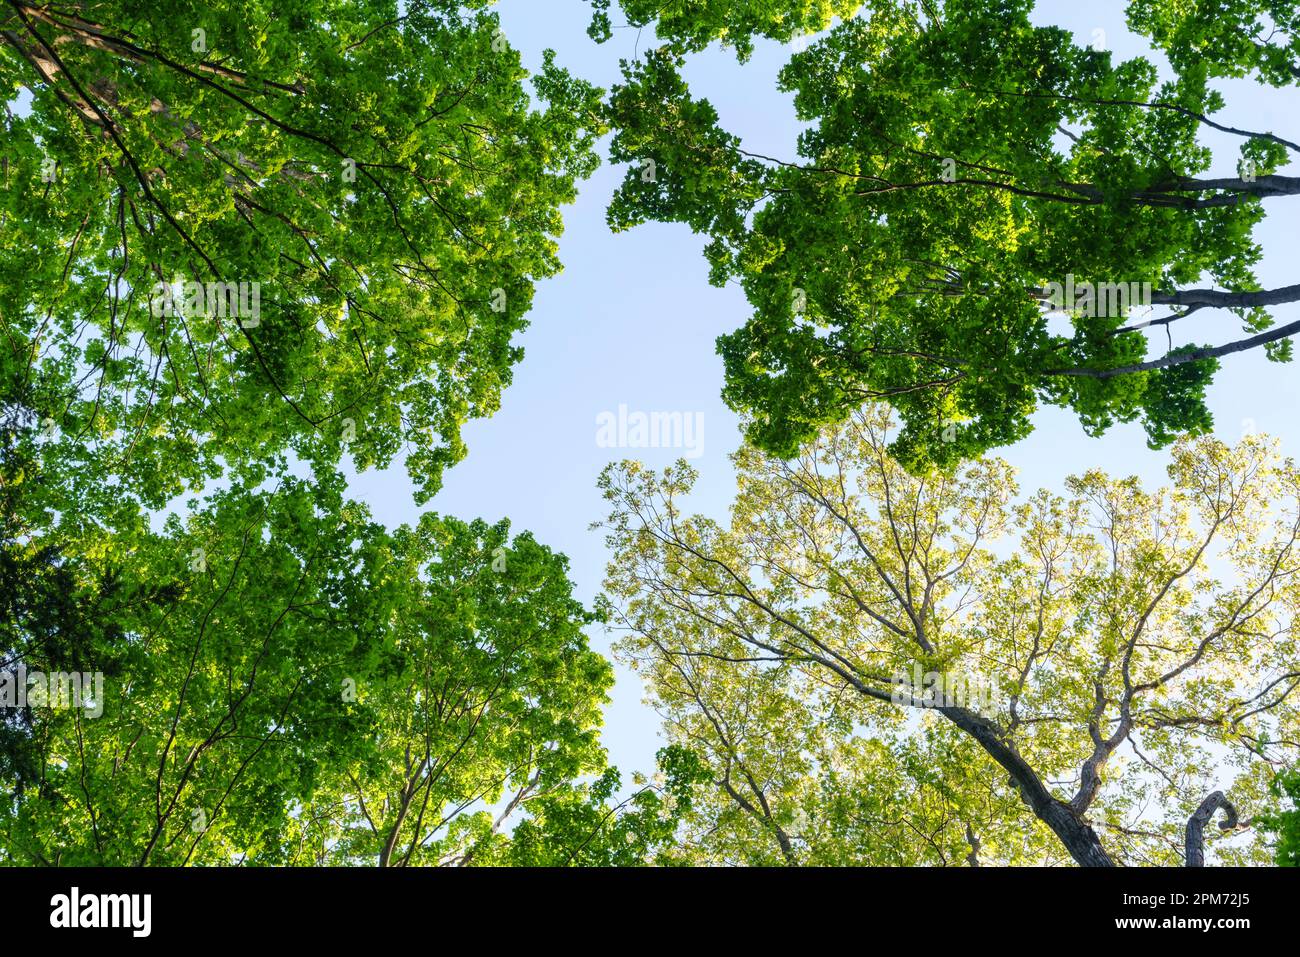 Treetops with yellow green leaves against blue sky. Oak tree Quercus sp and maple trees Acer sp. with copy space new growth spring nature background. Stock Photo